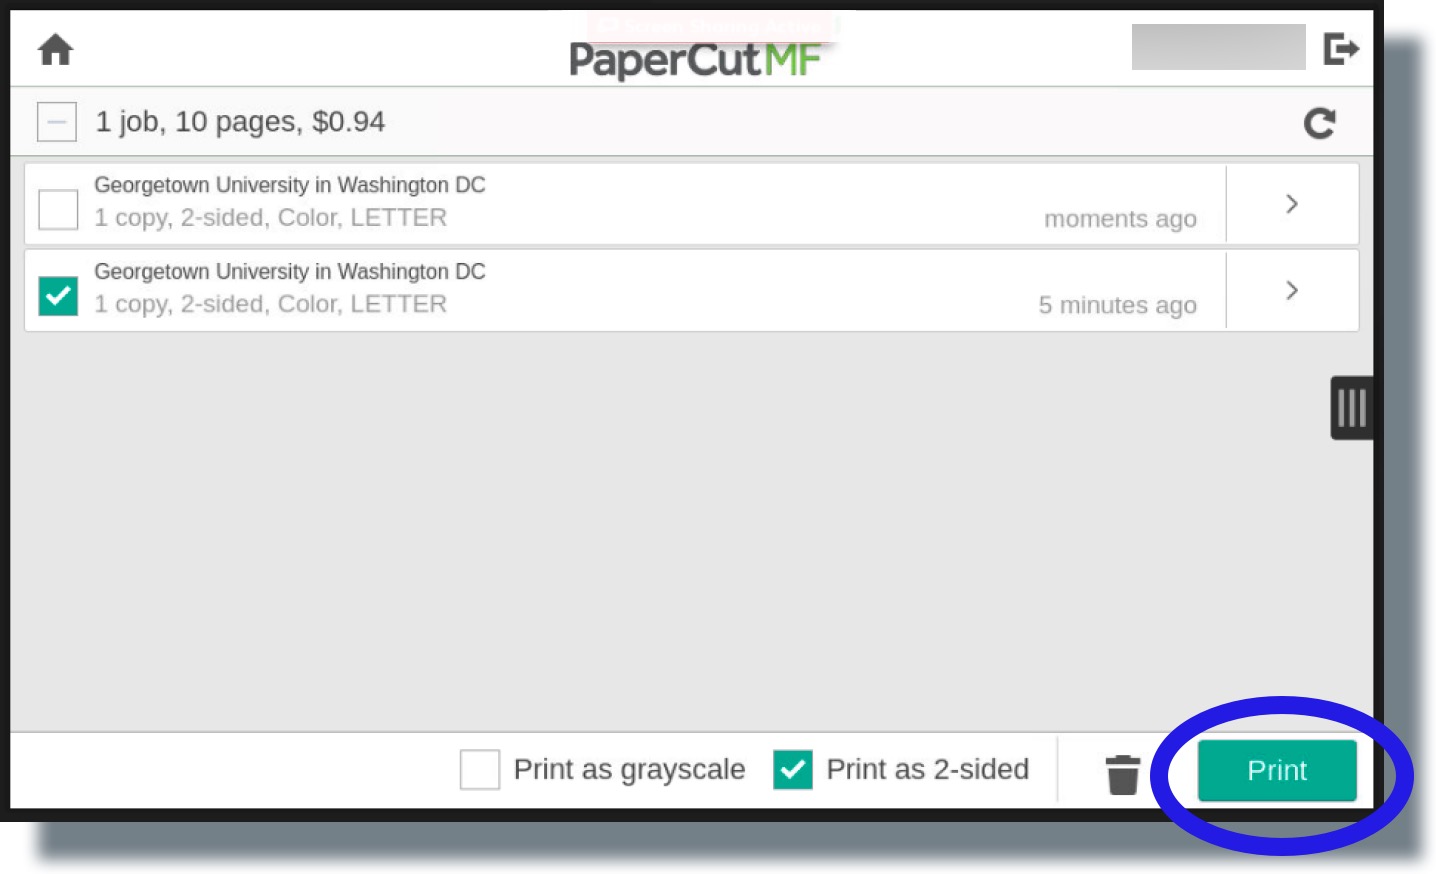 Select the documents your want to print from your list of print jobs, then tap 'Print'